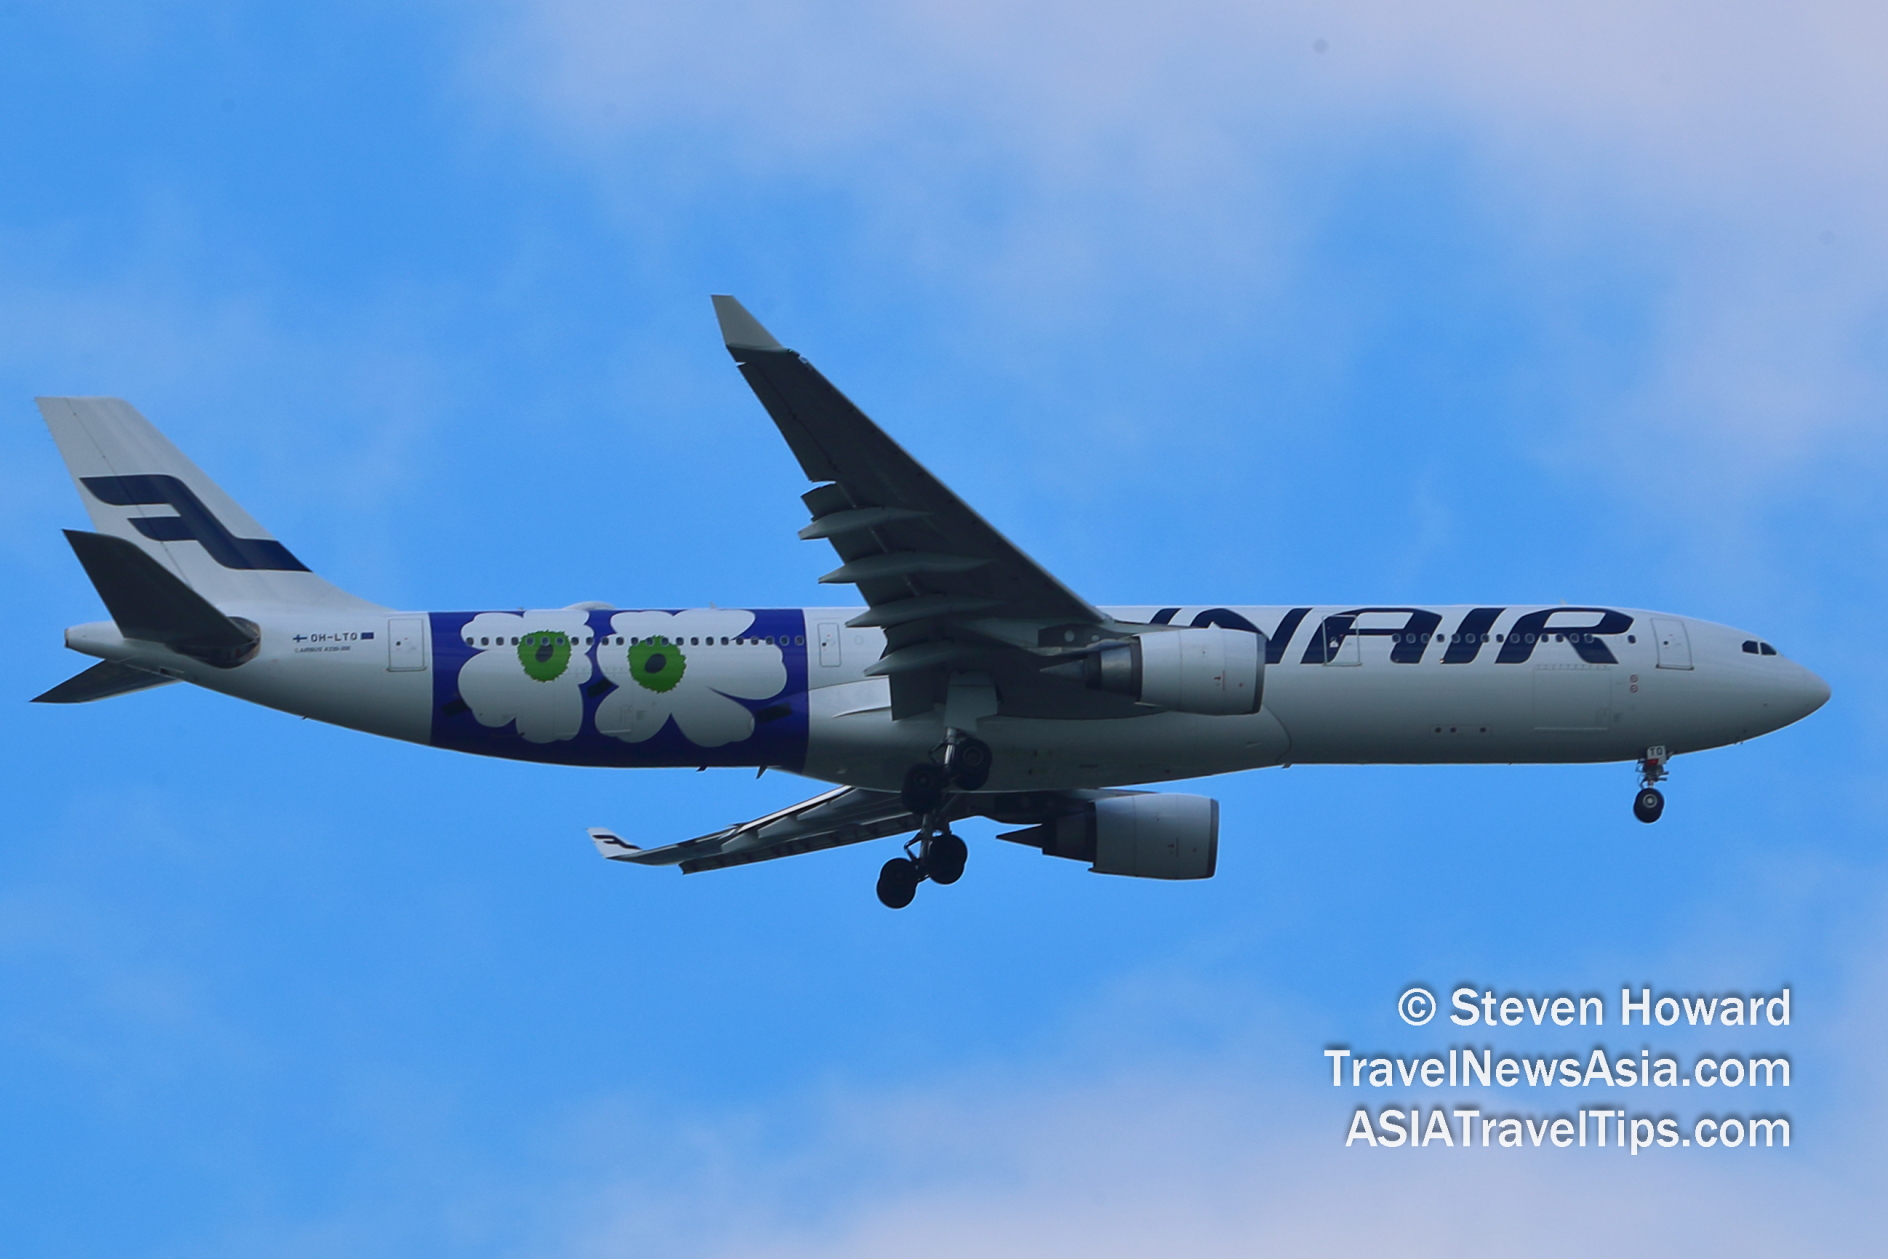 Finnair A330 reg: OH-LTO. Picture by Steven Howard of TravelNewsAsia.com Click to enlarge.